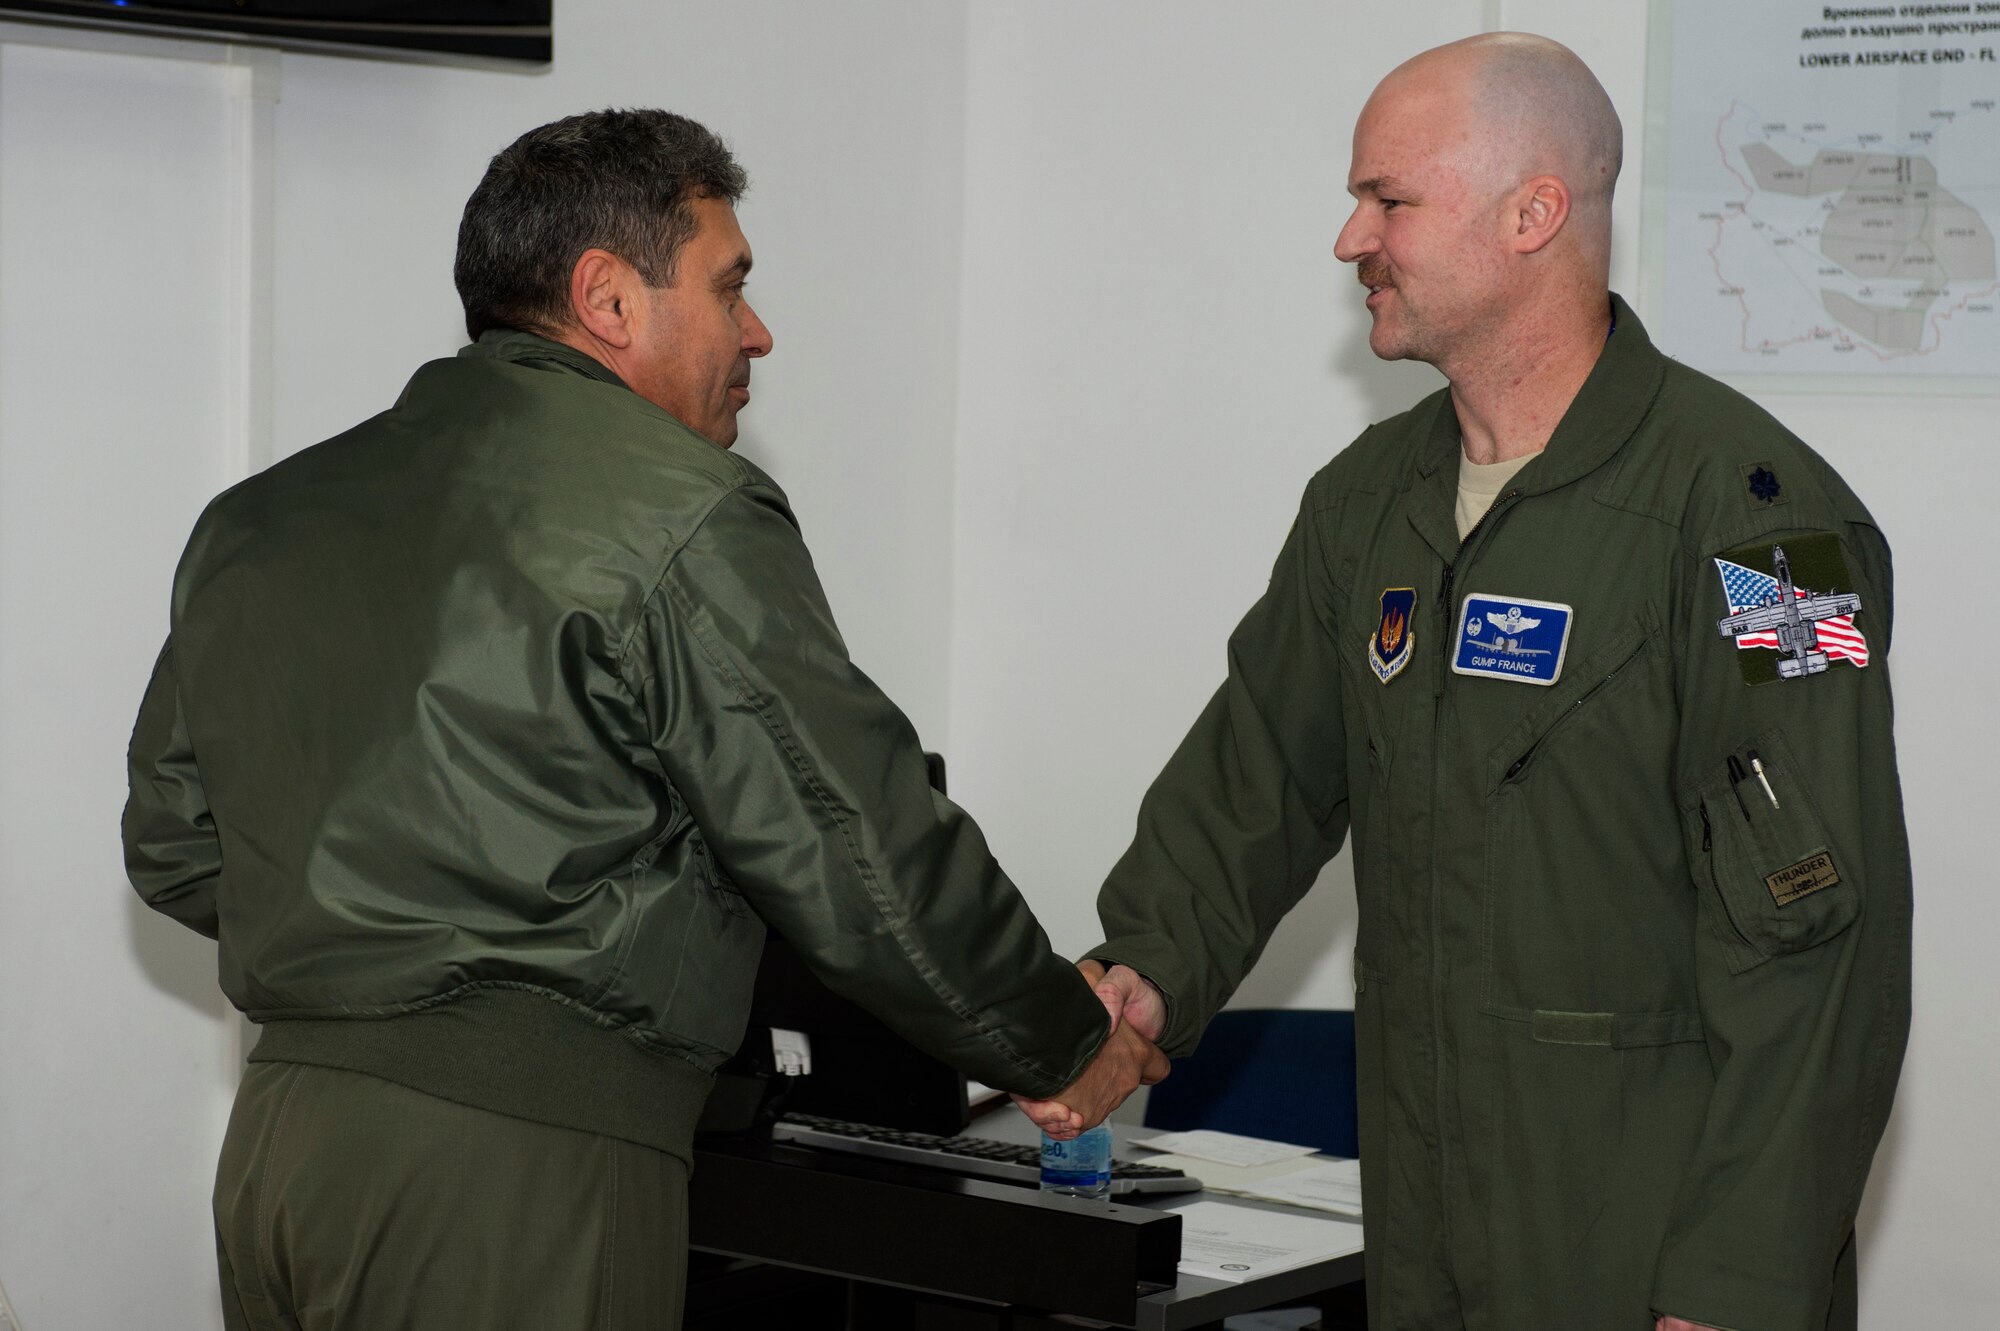 Bulgarian air force Brig. Gen. Ivan Lalov, 3rd Air Force Base commander, left, shakes the hand of U.S. Air Force Lt. Col. Bryan France, 74th Expeditionary Fighter Squadron commander, right, during the 74th EFS’s deployment in support of Operation Atlantic Resolve at Graf Ignatievo, Bulgaria, March 16, 2016. The 74th EFS participated in a six-month deployment to Eastern Europe which began at Amari Air Base, Estonia, and concluded at Graf Ignatievo. (U.S. Air Force photo by Staff Sgt. Joe W. McFadden/Released)